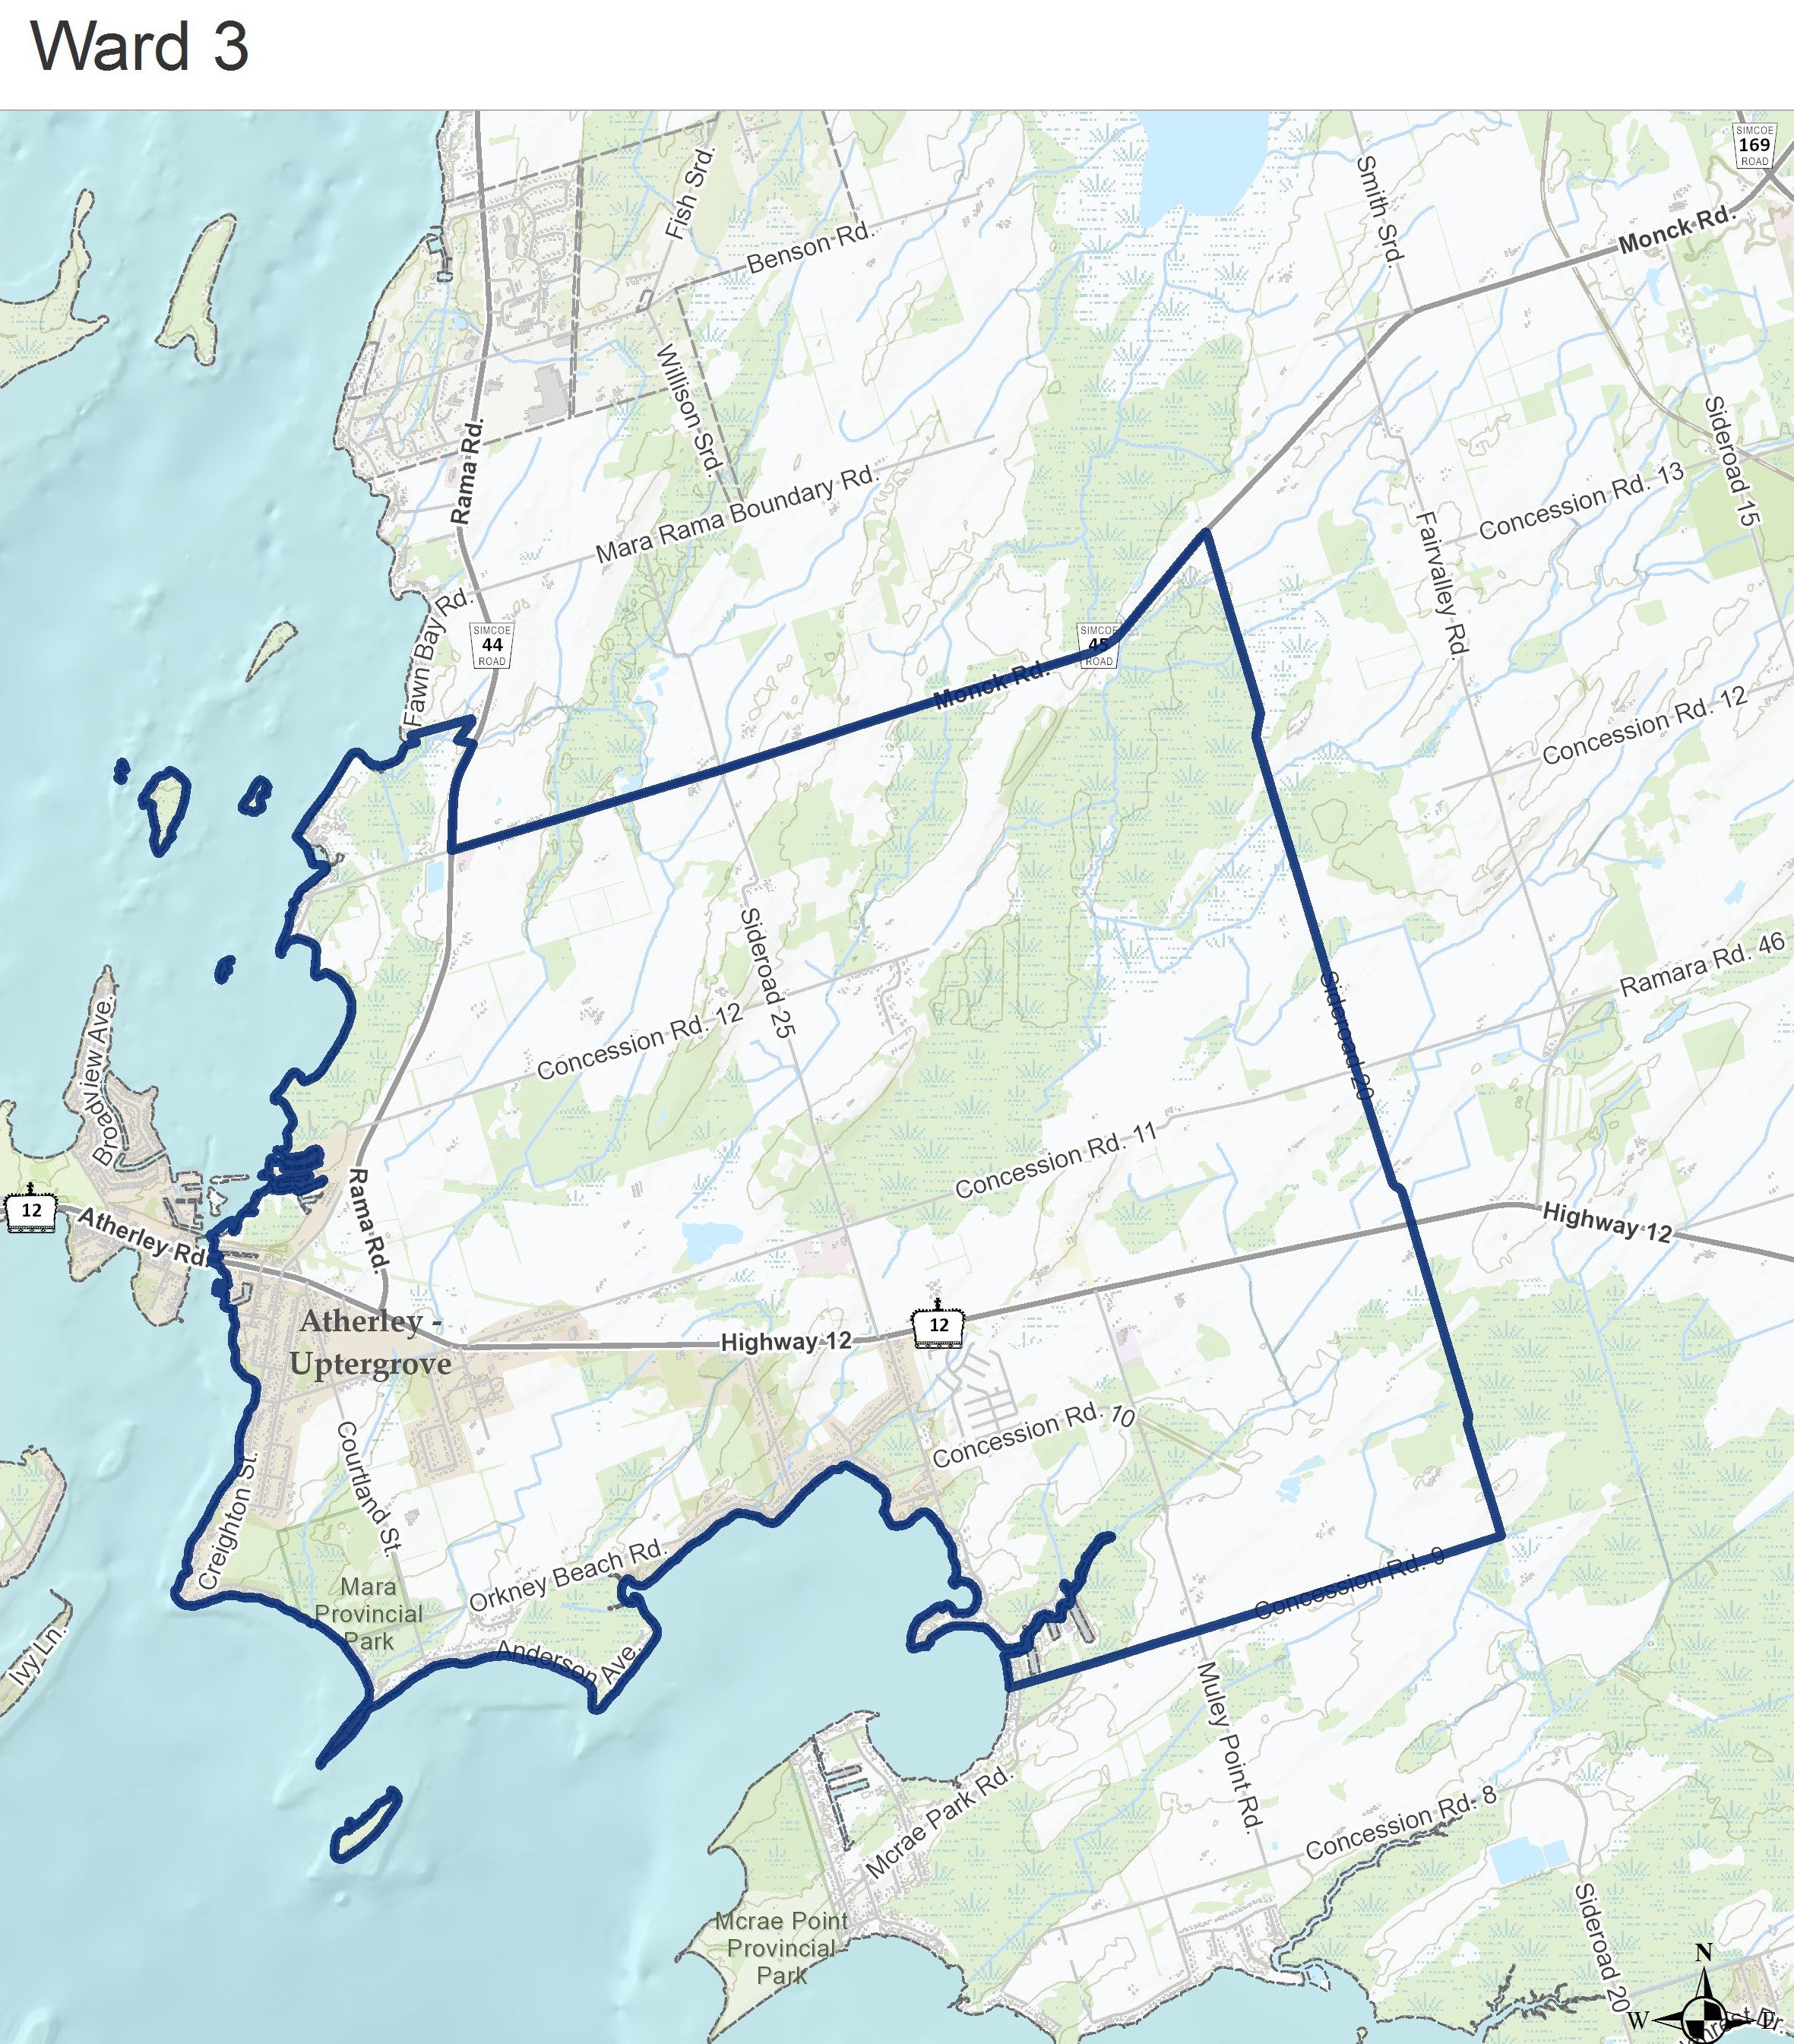 Map showing the area of Ward 3